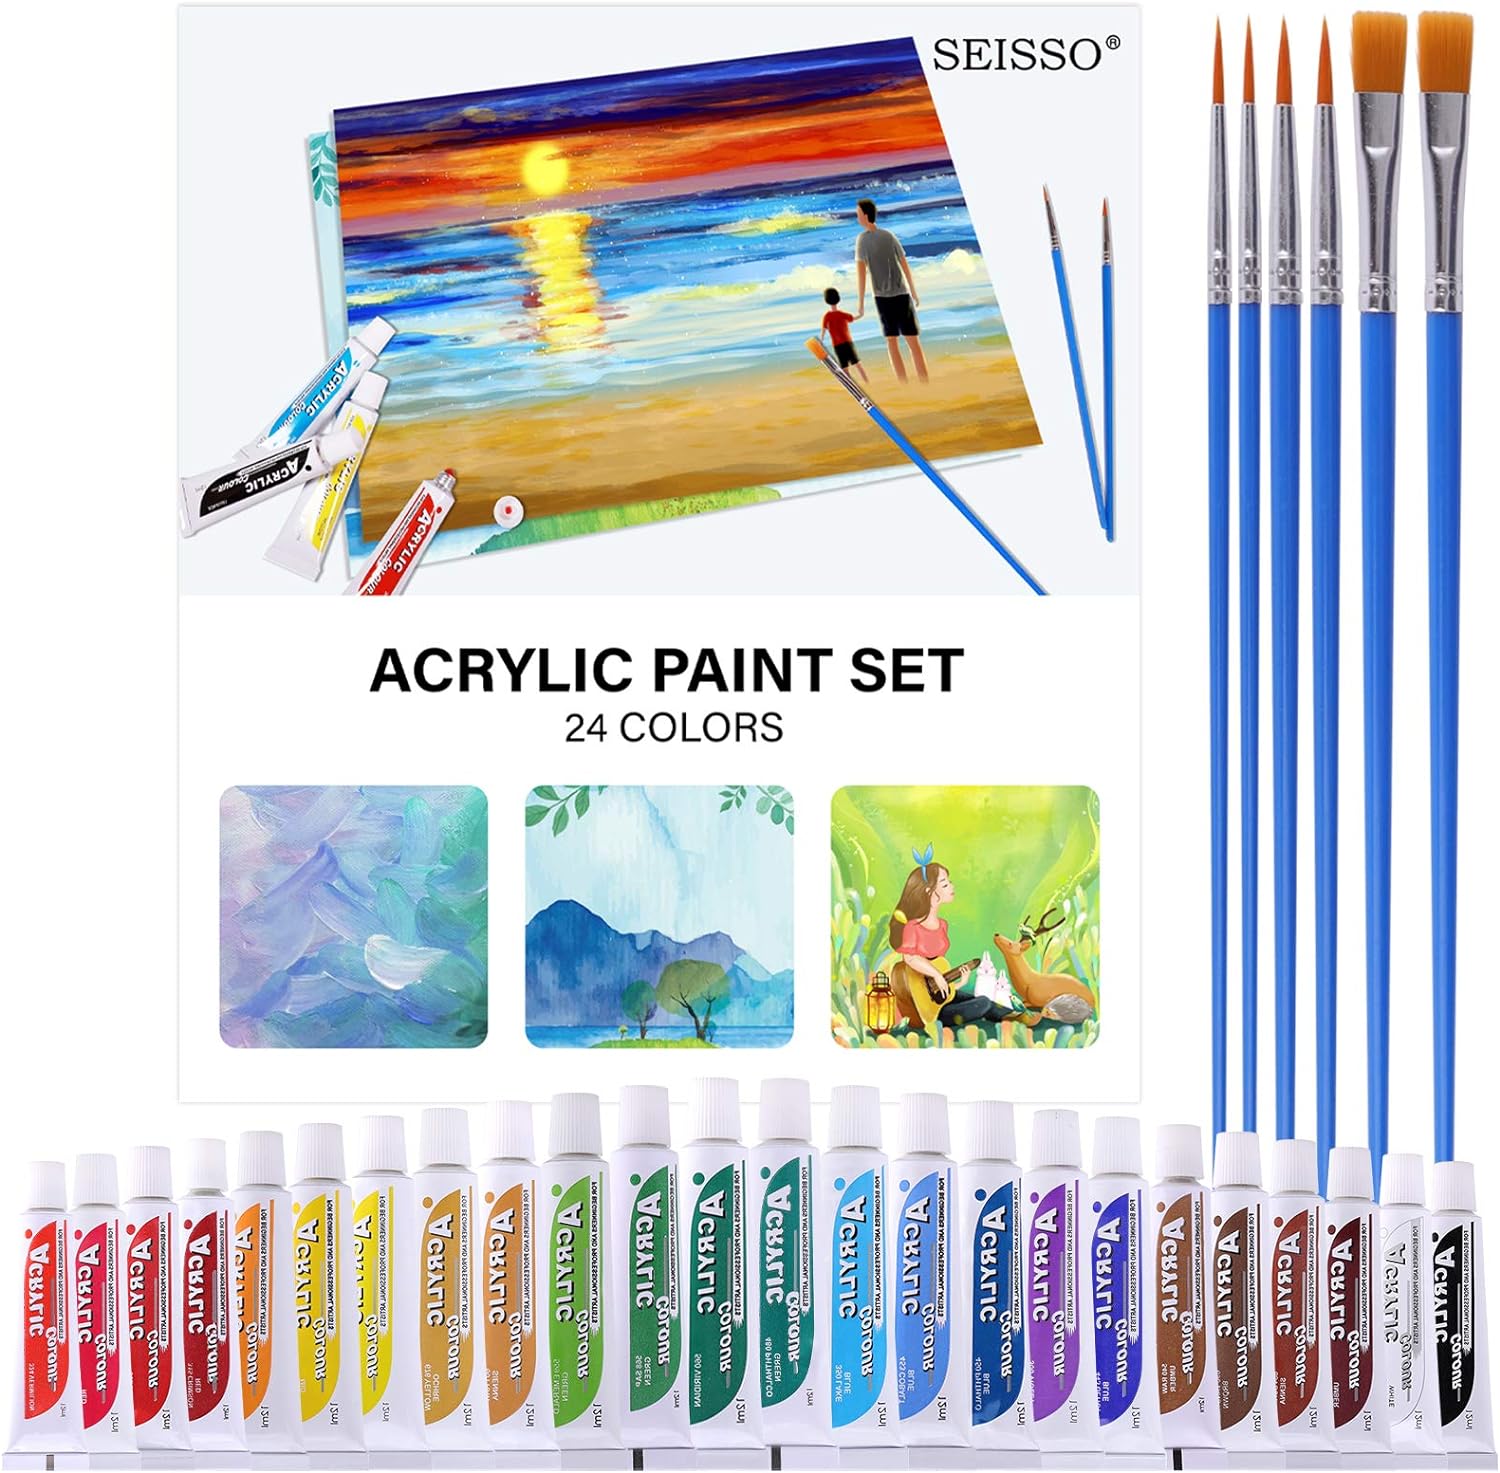 Acrylic Paint Set 24 Colors Tube Painting Kit with 6 Brushes for